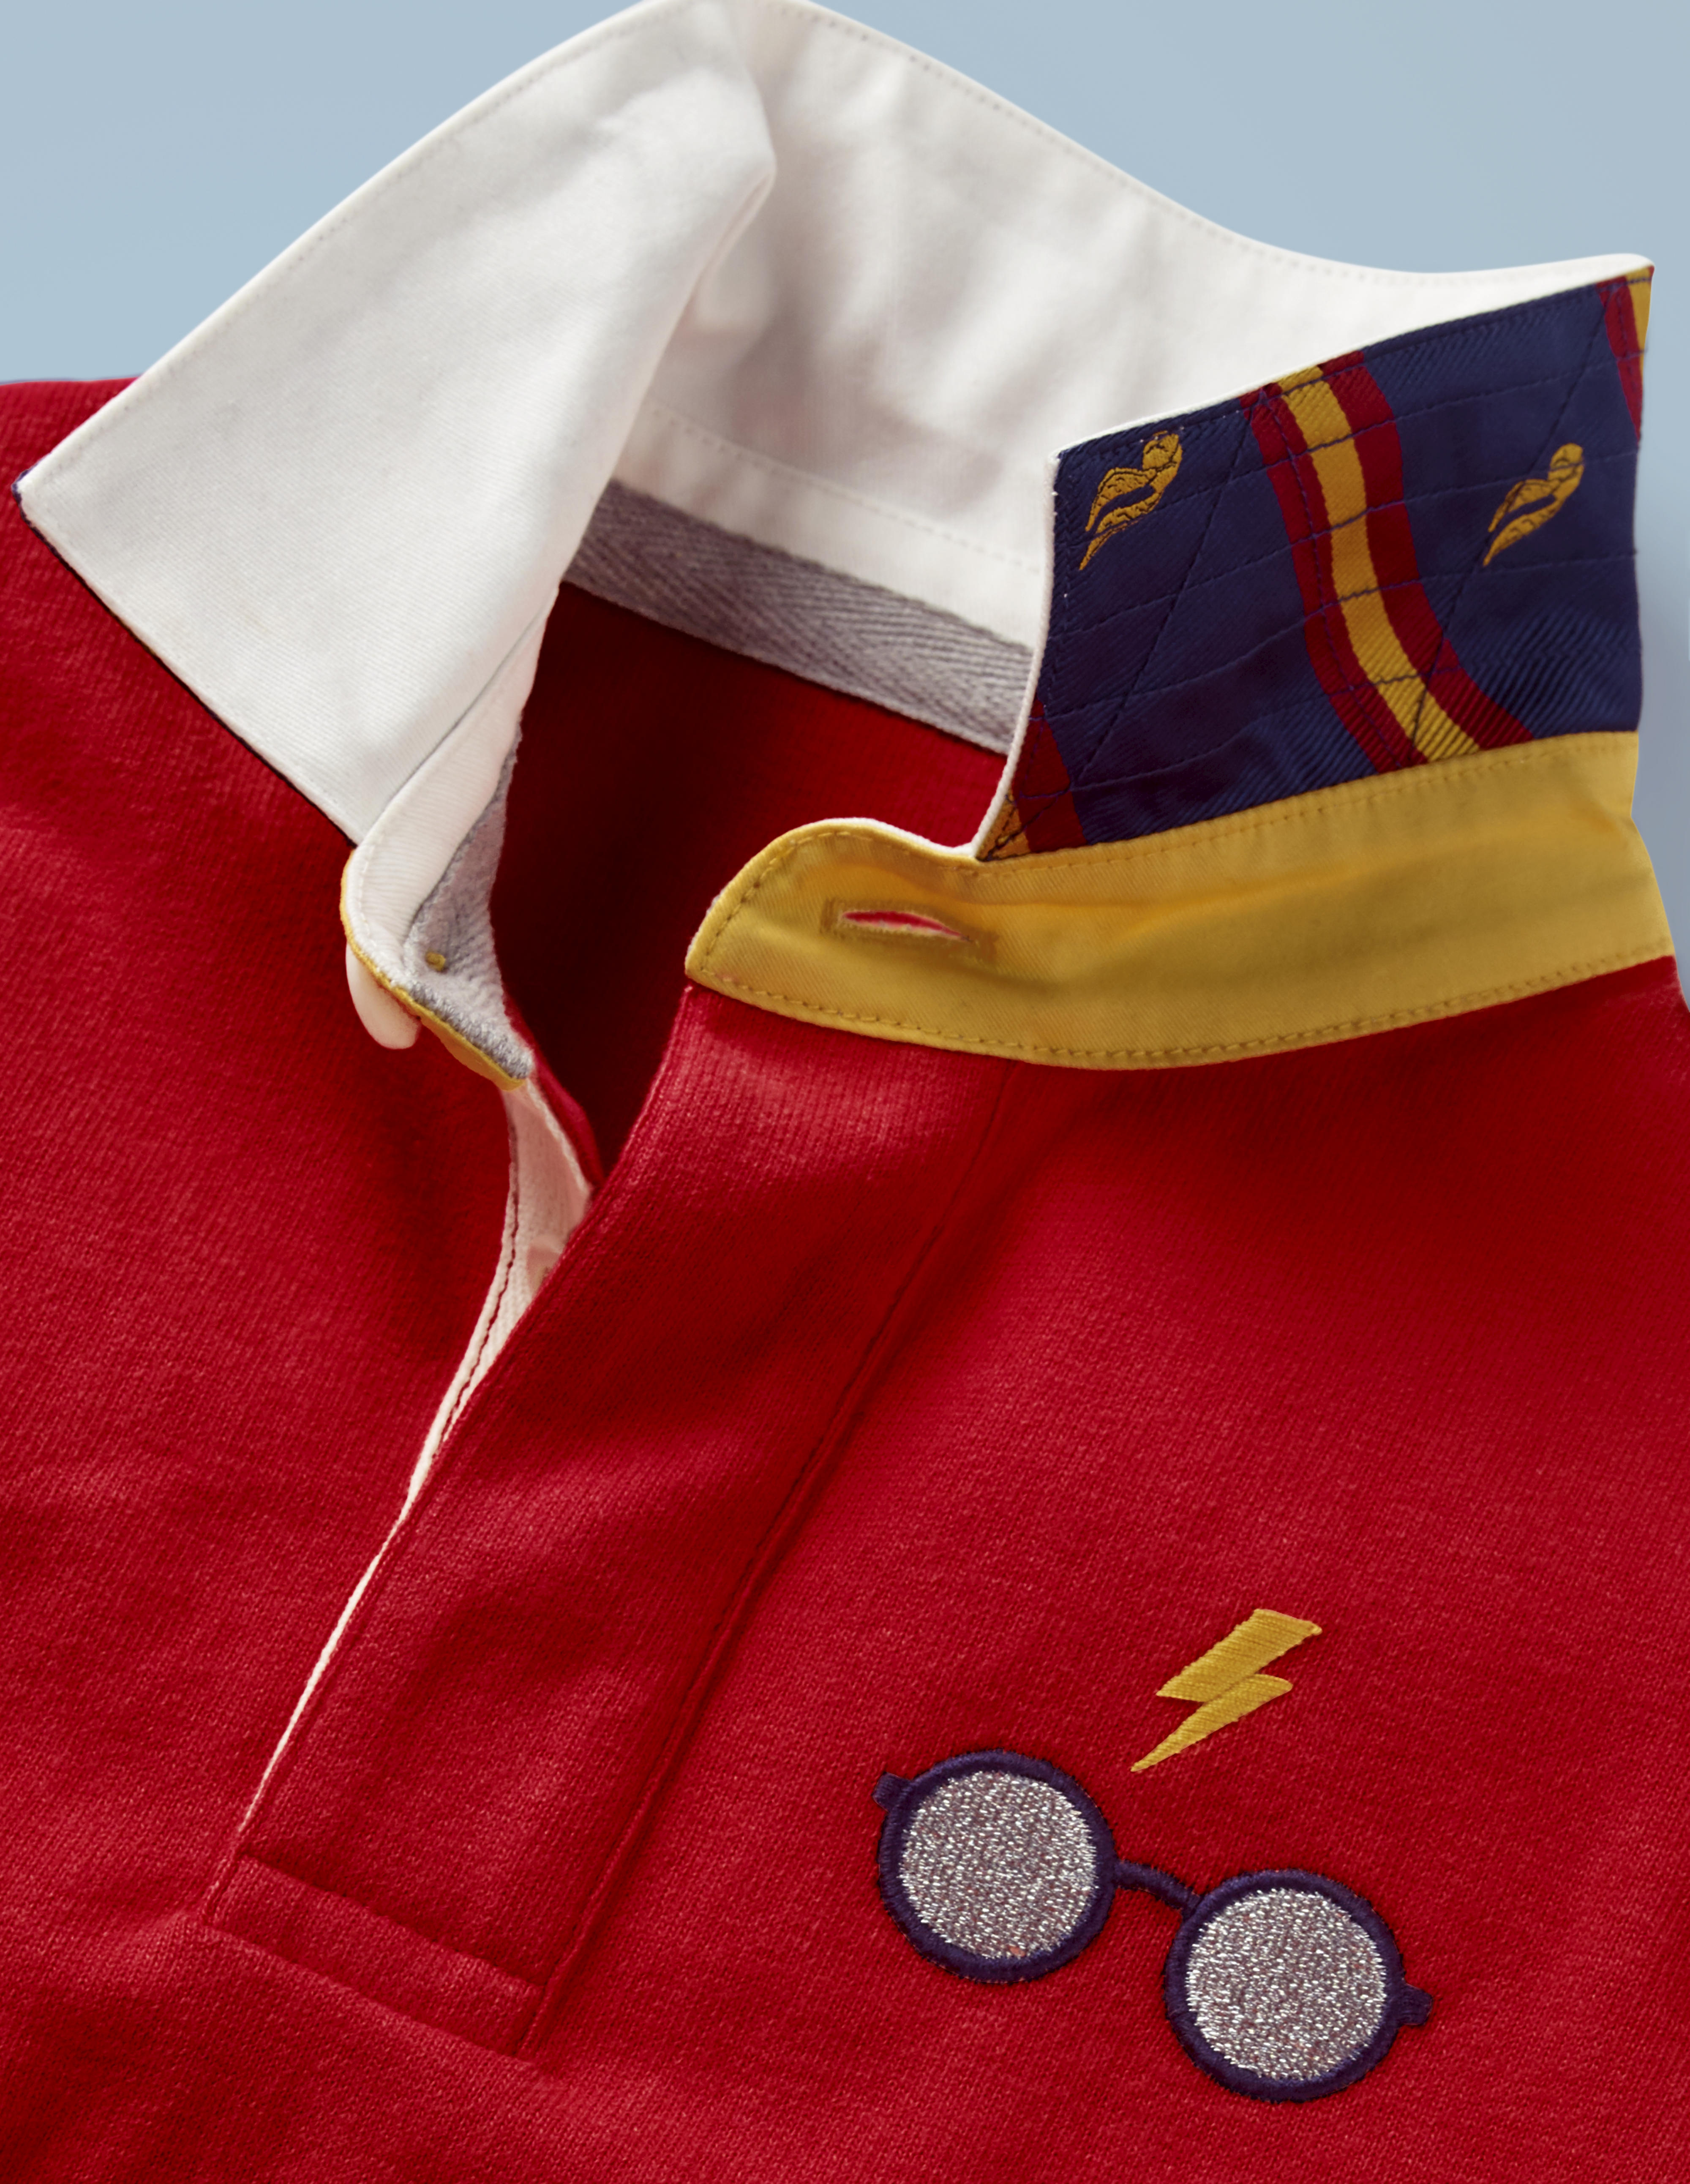 This close-up of the Mini Boden Hogwarts Rugby Shirt in red provides a better look at the collar design and glasses-and-scar logo in the front pocket area. It retails at £30.